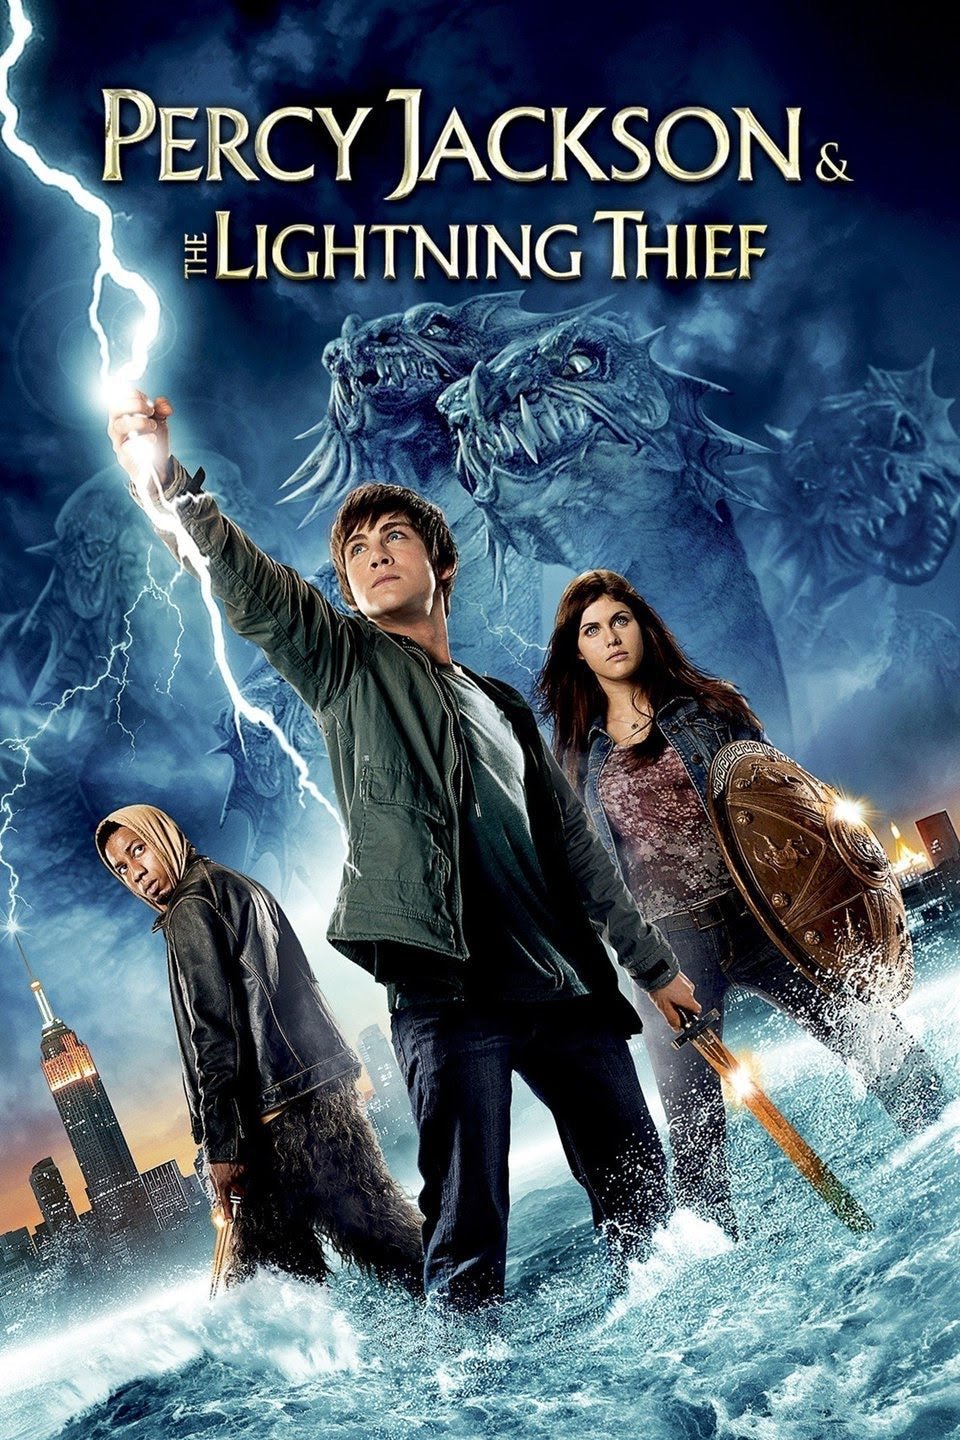 Percy Jackson: The Lightning Thief (2012) iTunes HD or Vudu / Movies Anywhere HD code